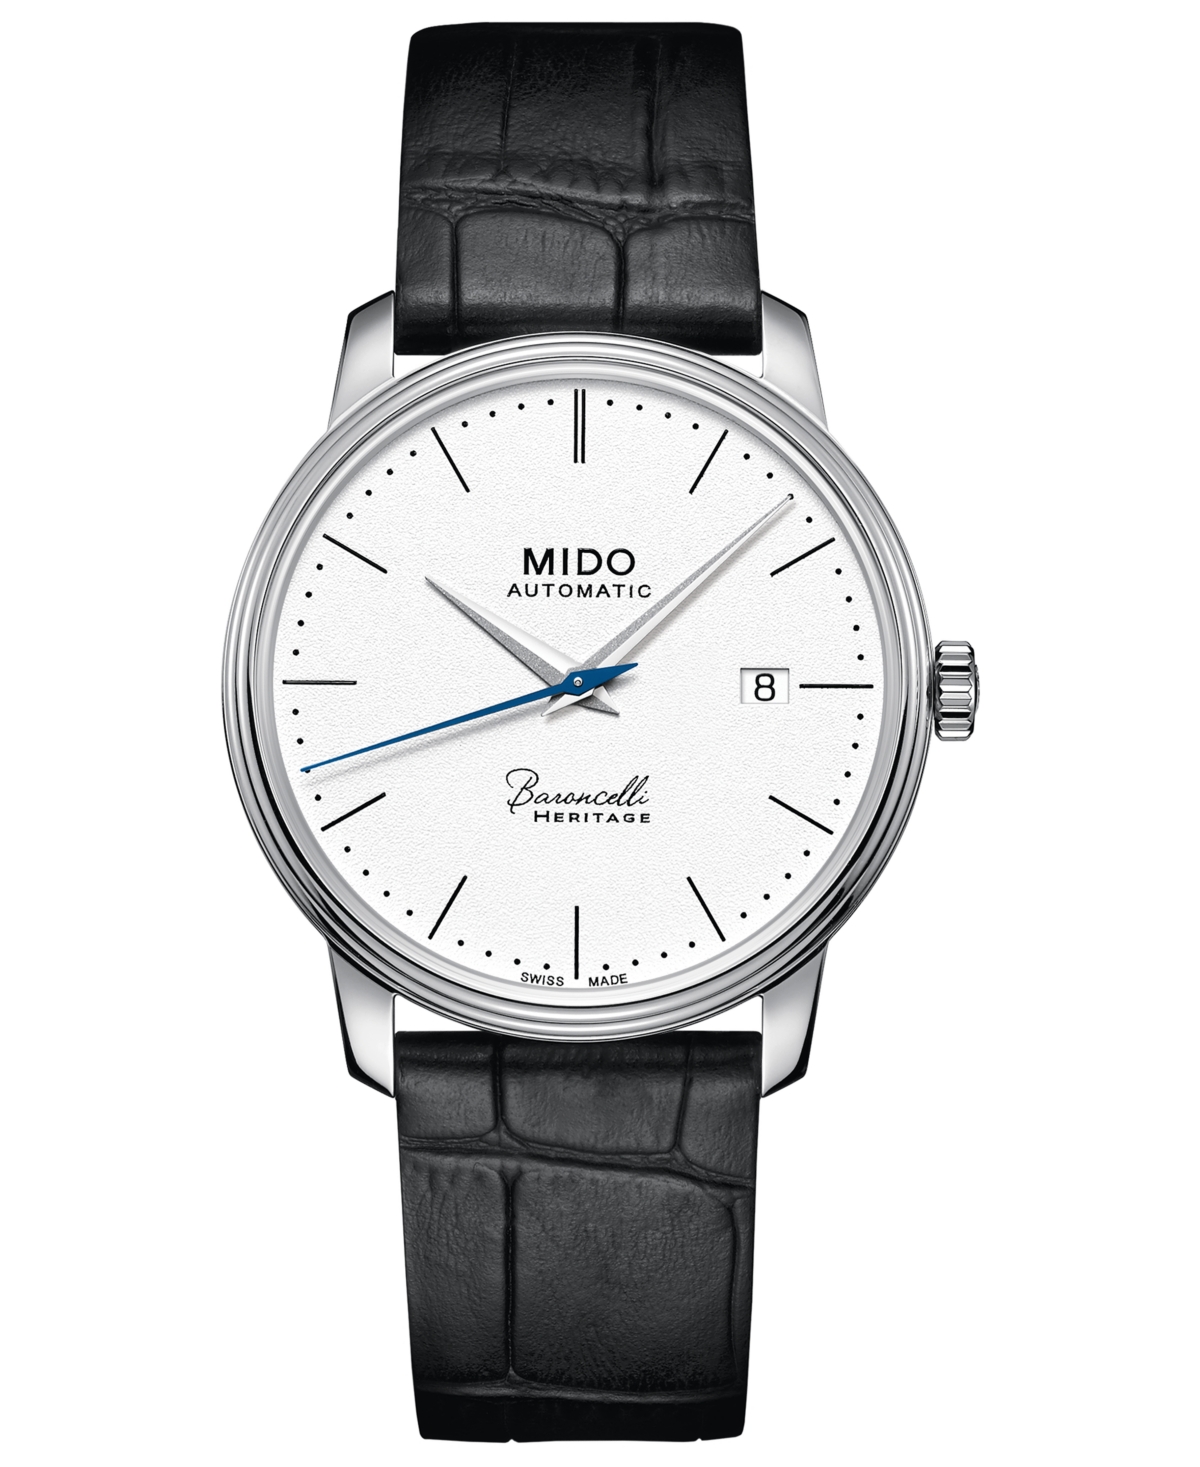 MIDO MEN'S SWISS AUTOMATIC BARONCELLI III HERITAGE BLACK LEATHER STRAP WATCH 39MM